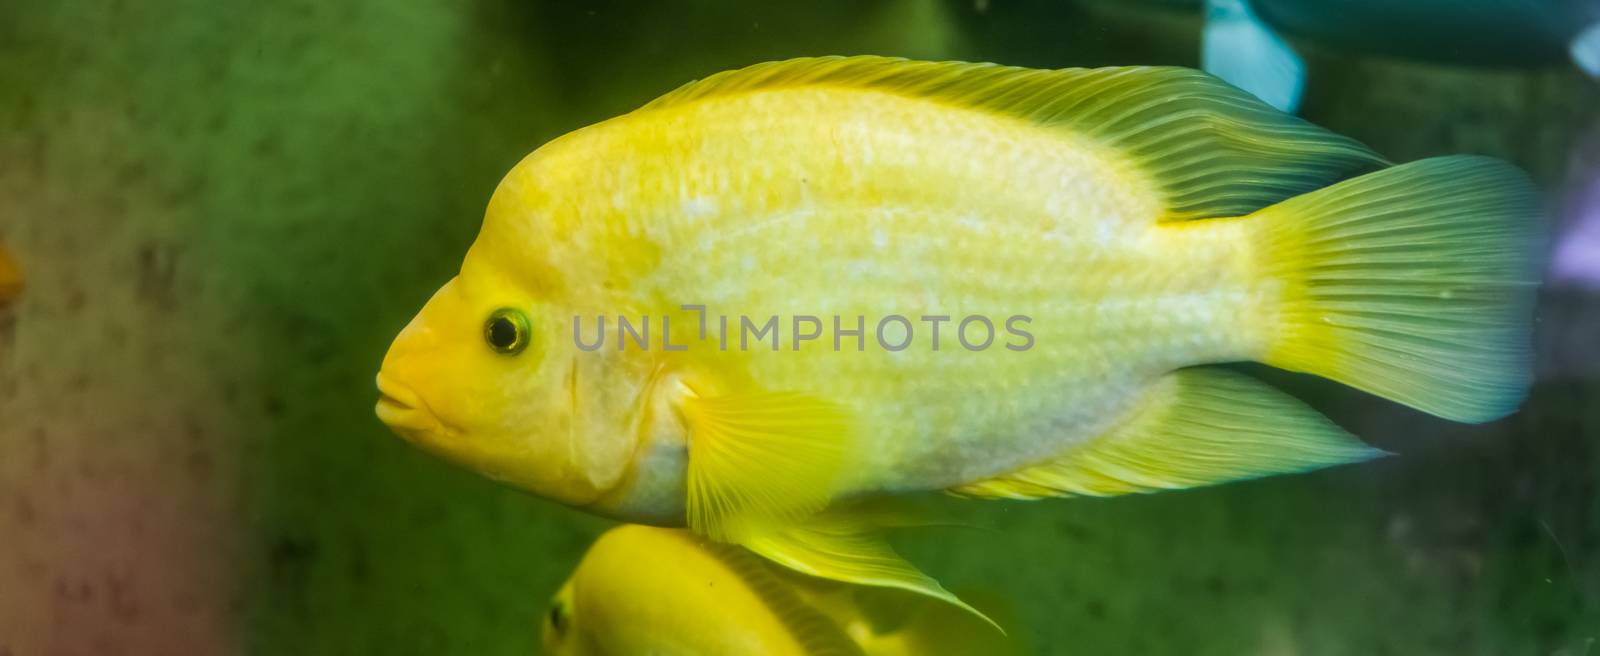 Midas cichlid in closeup, Yellow and white colored tropical fish, Exotic fish specie from Costa rica